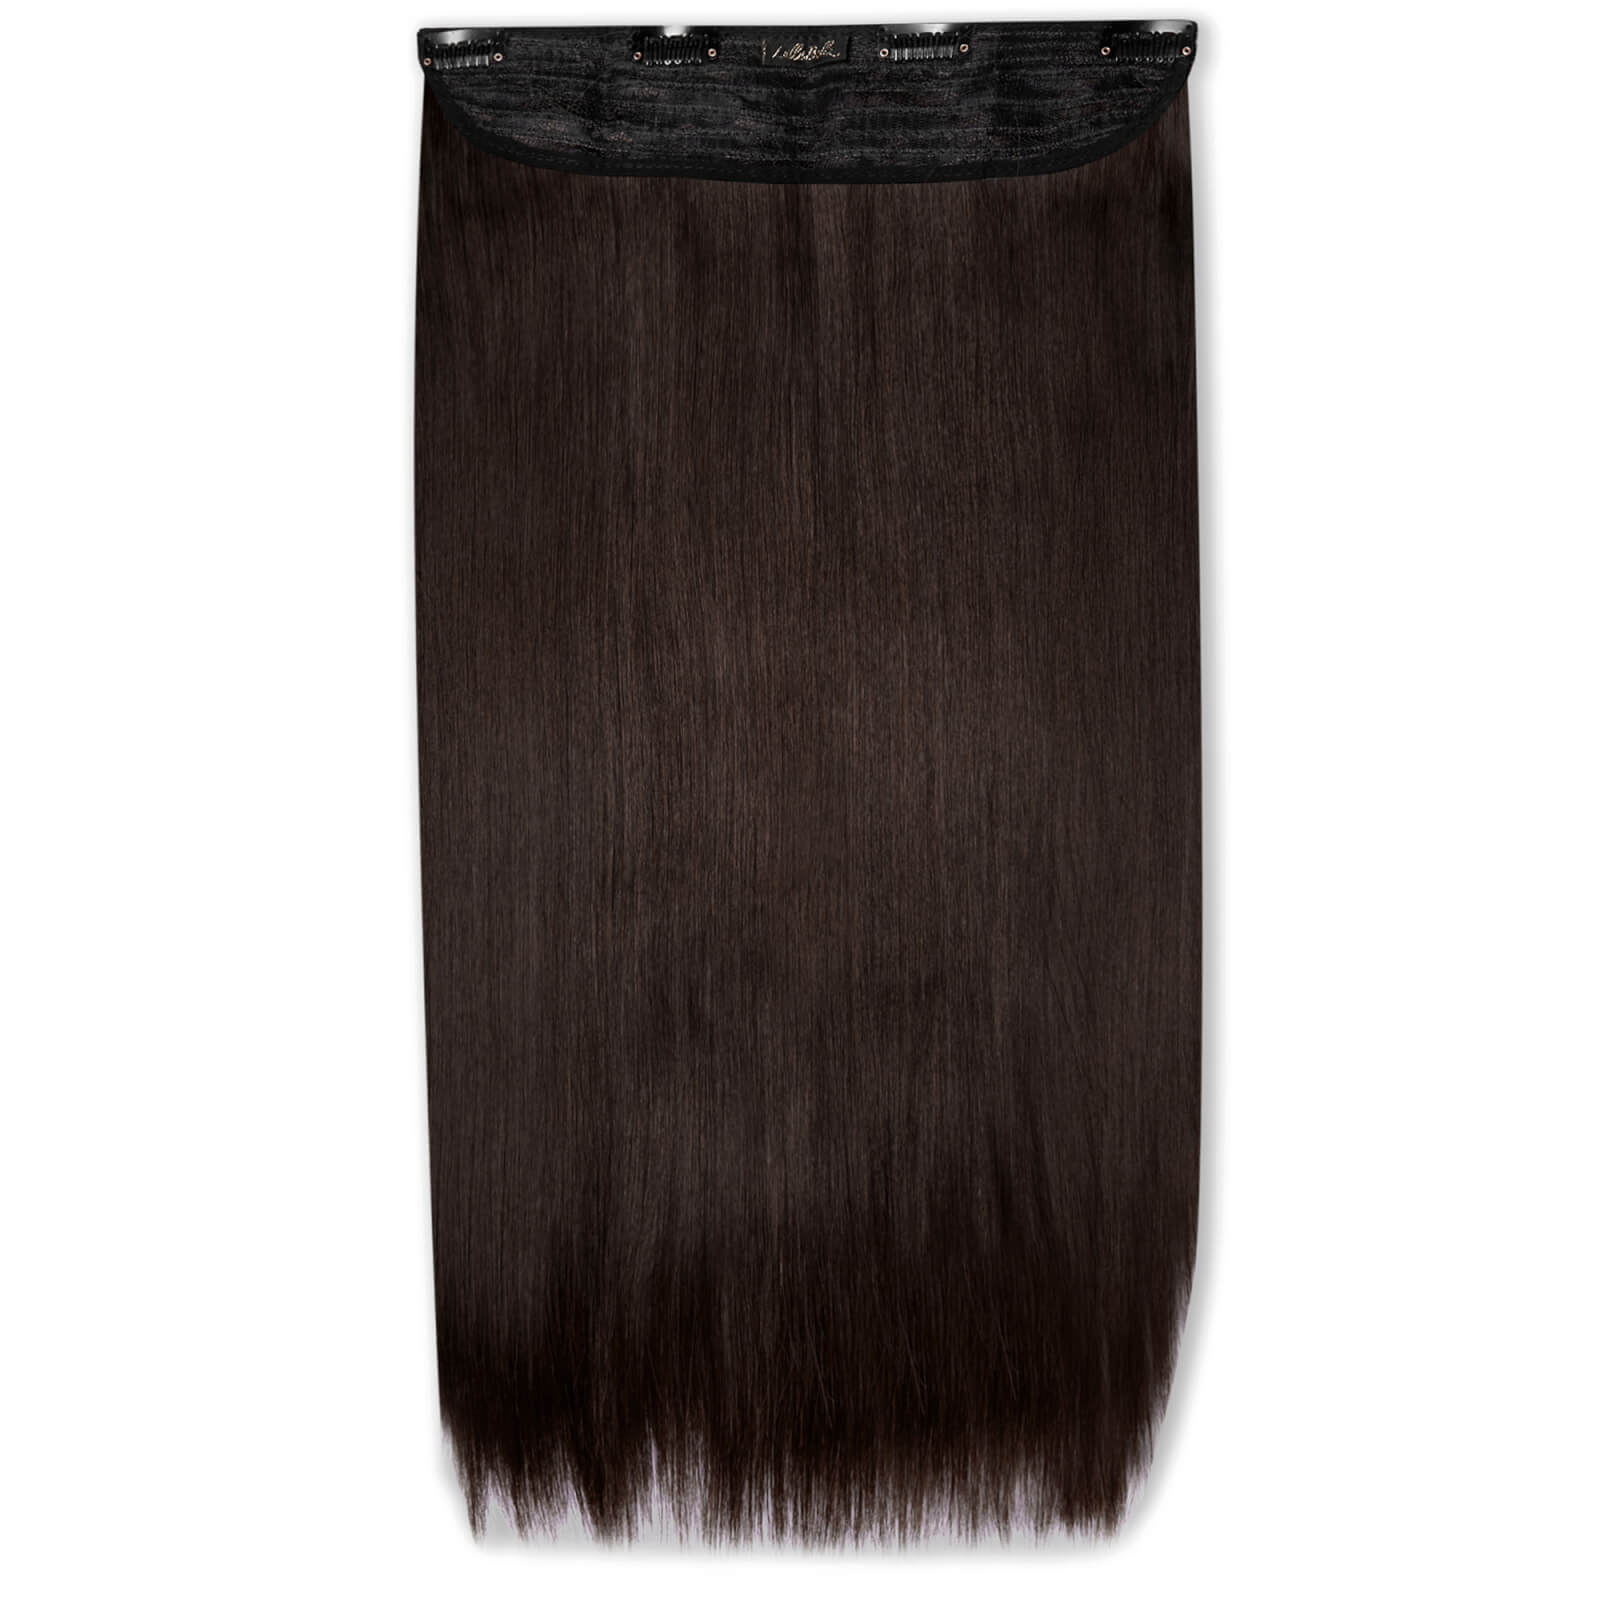 LullaBellz Thick 24 1-Piece Straight Clip in Hair Extensions (Various Colours) - Dark Brown